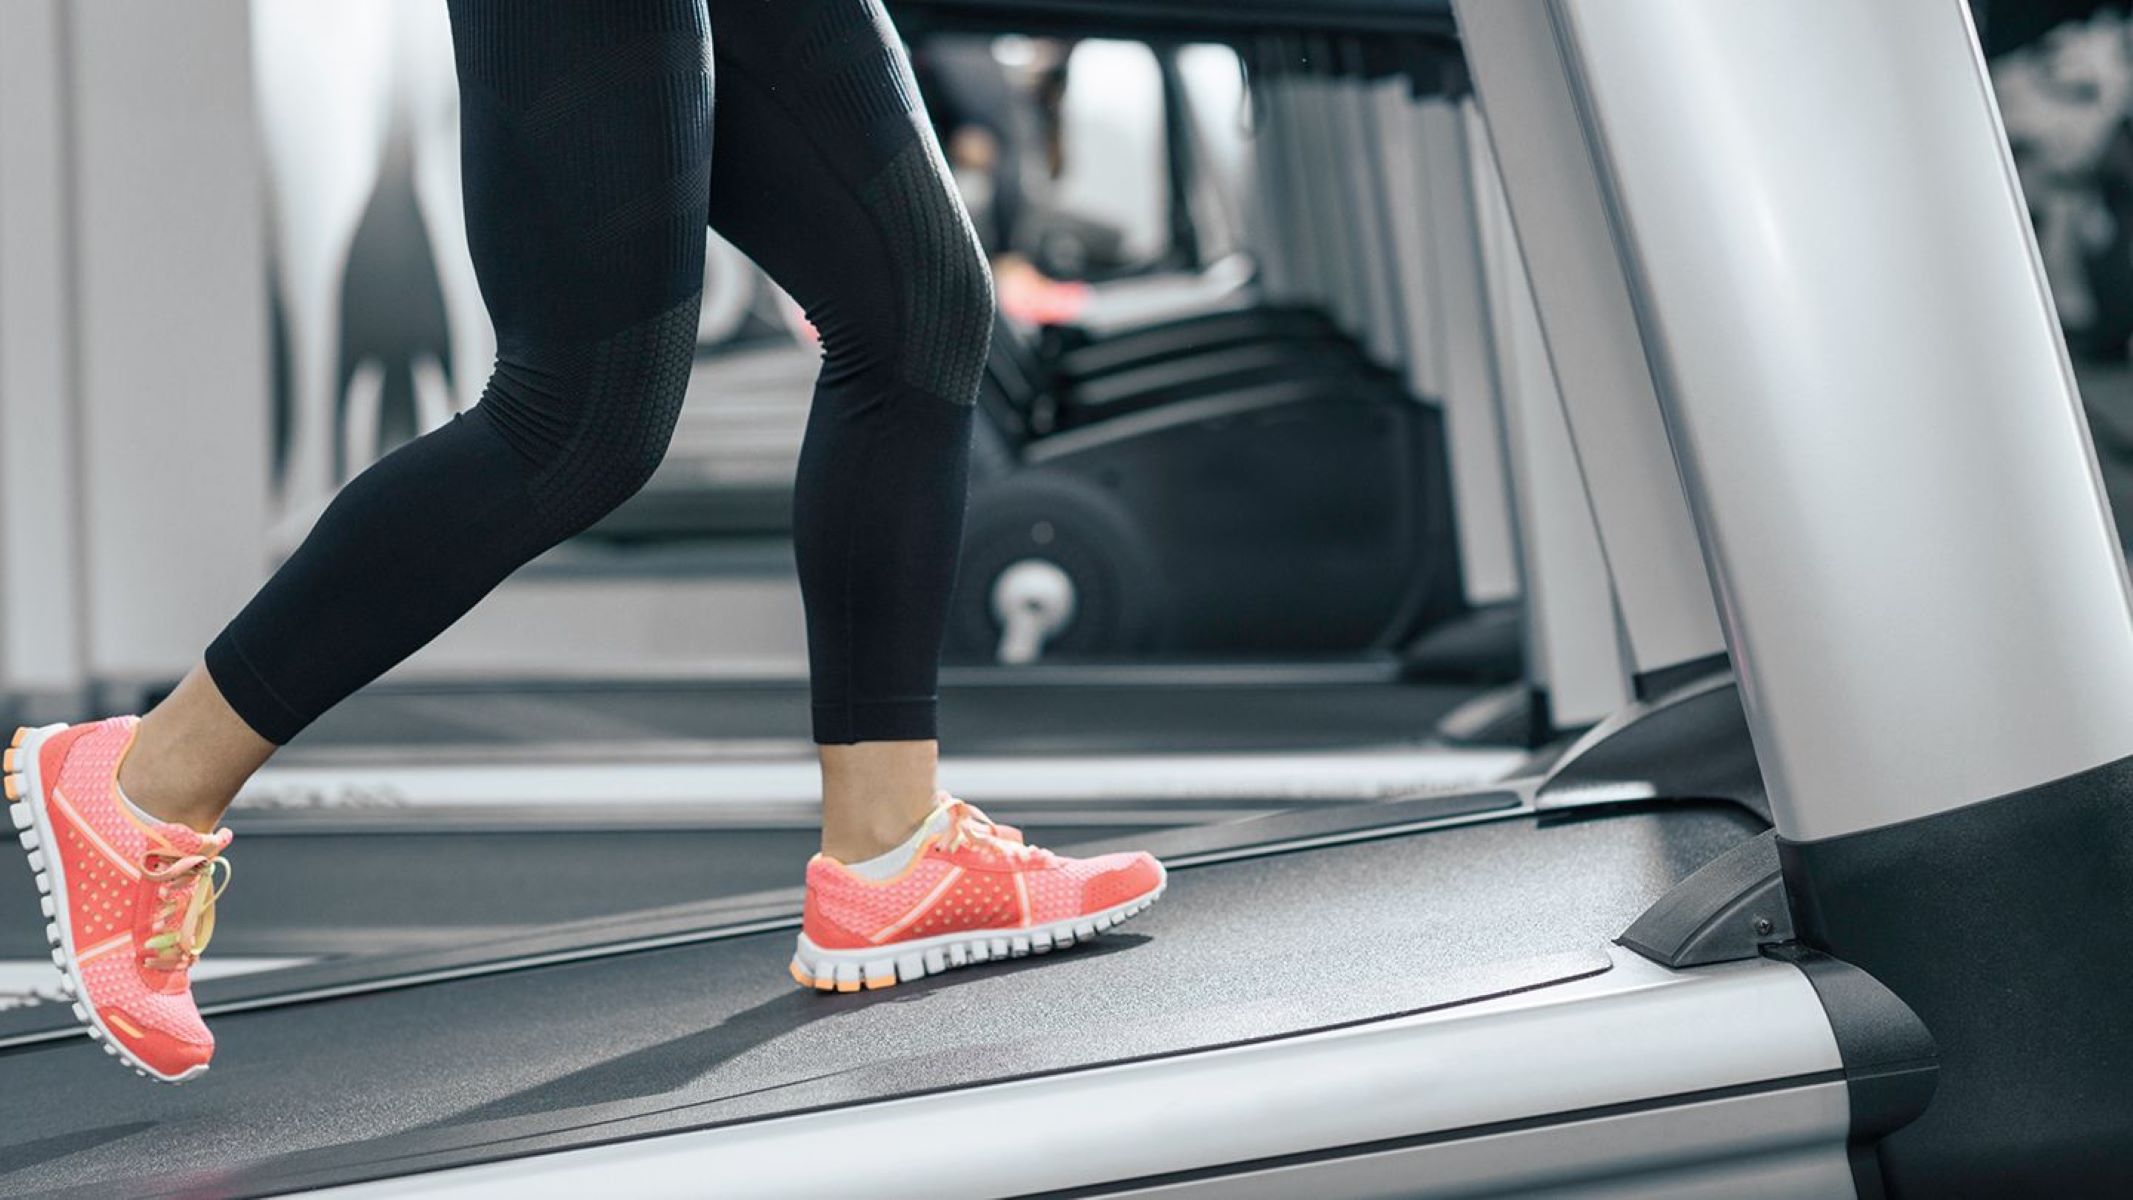 What Is Incline Percentage On Treadmill